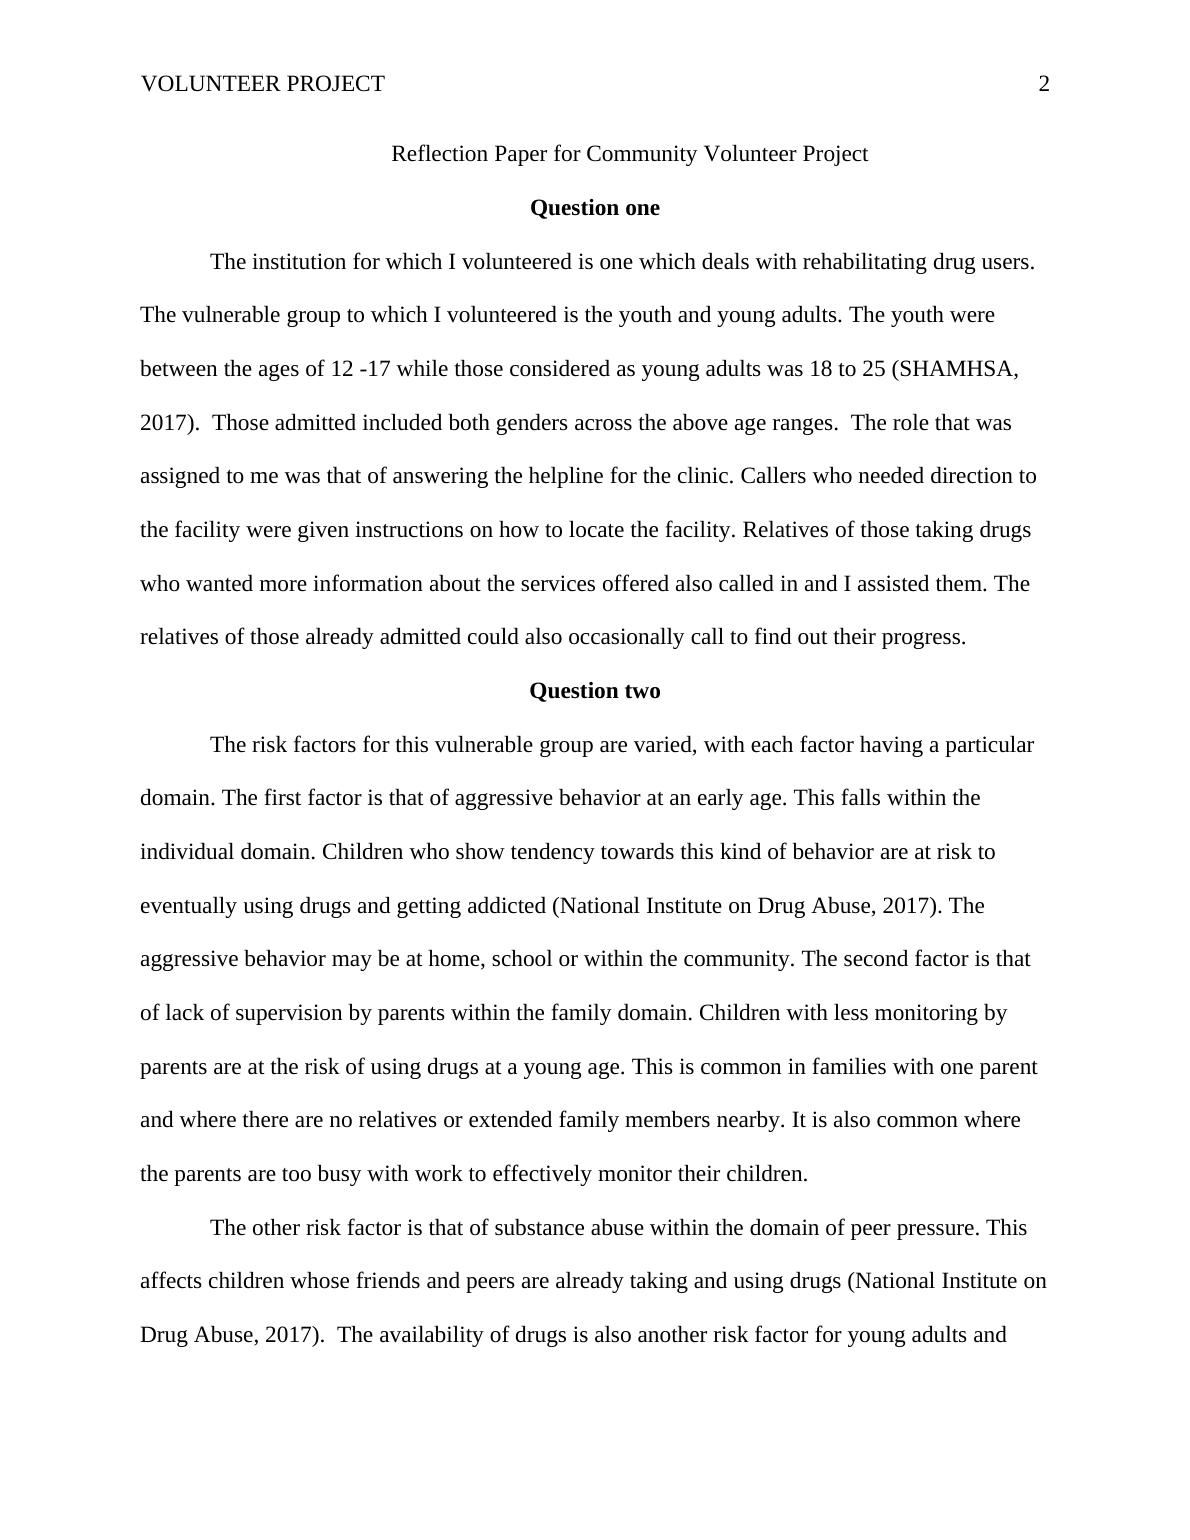 Reflection Paper for Community Volunteer Project_2